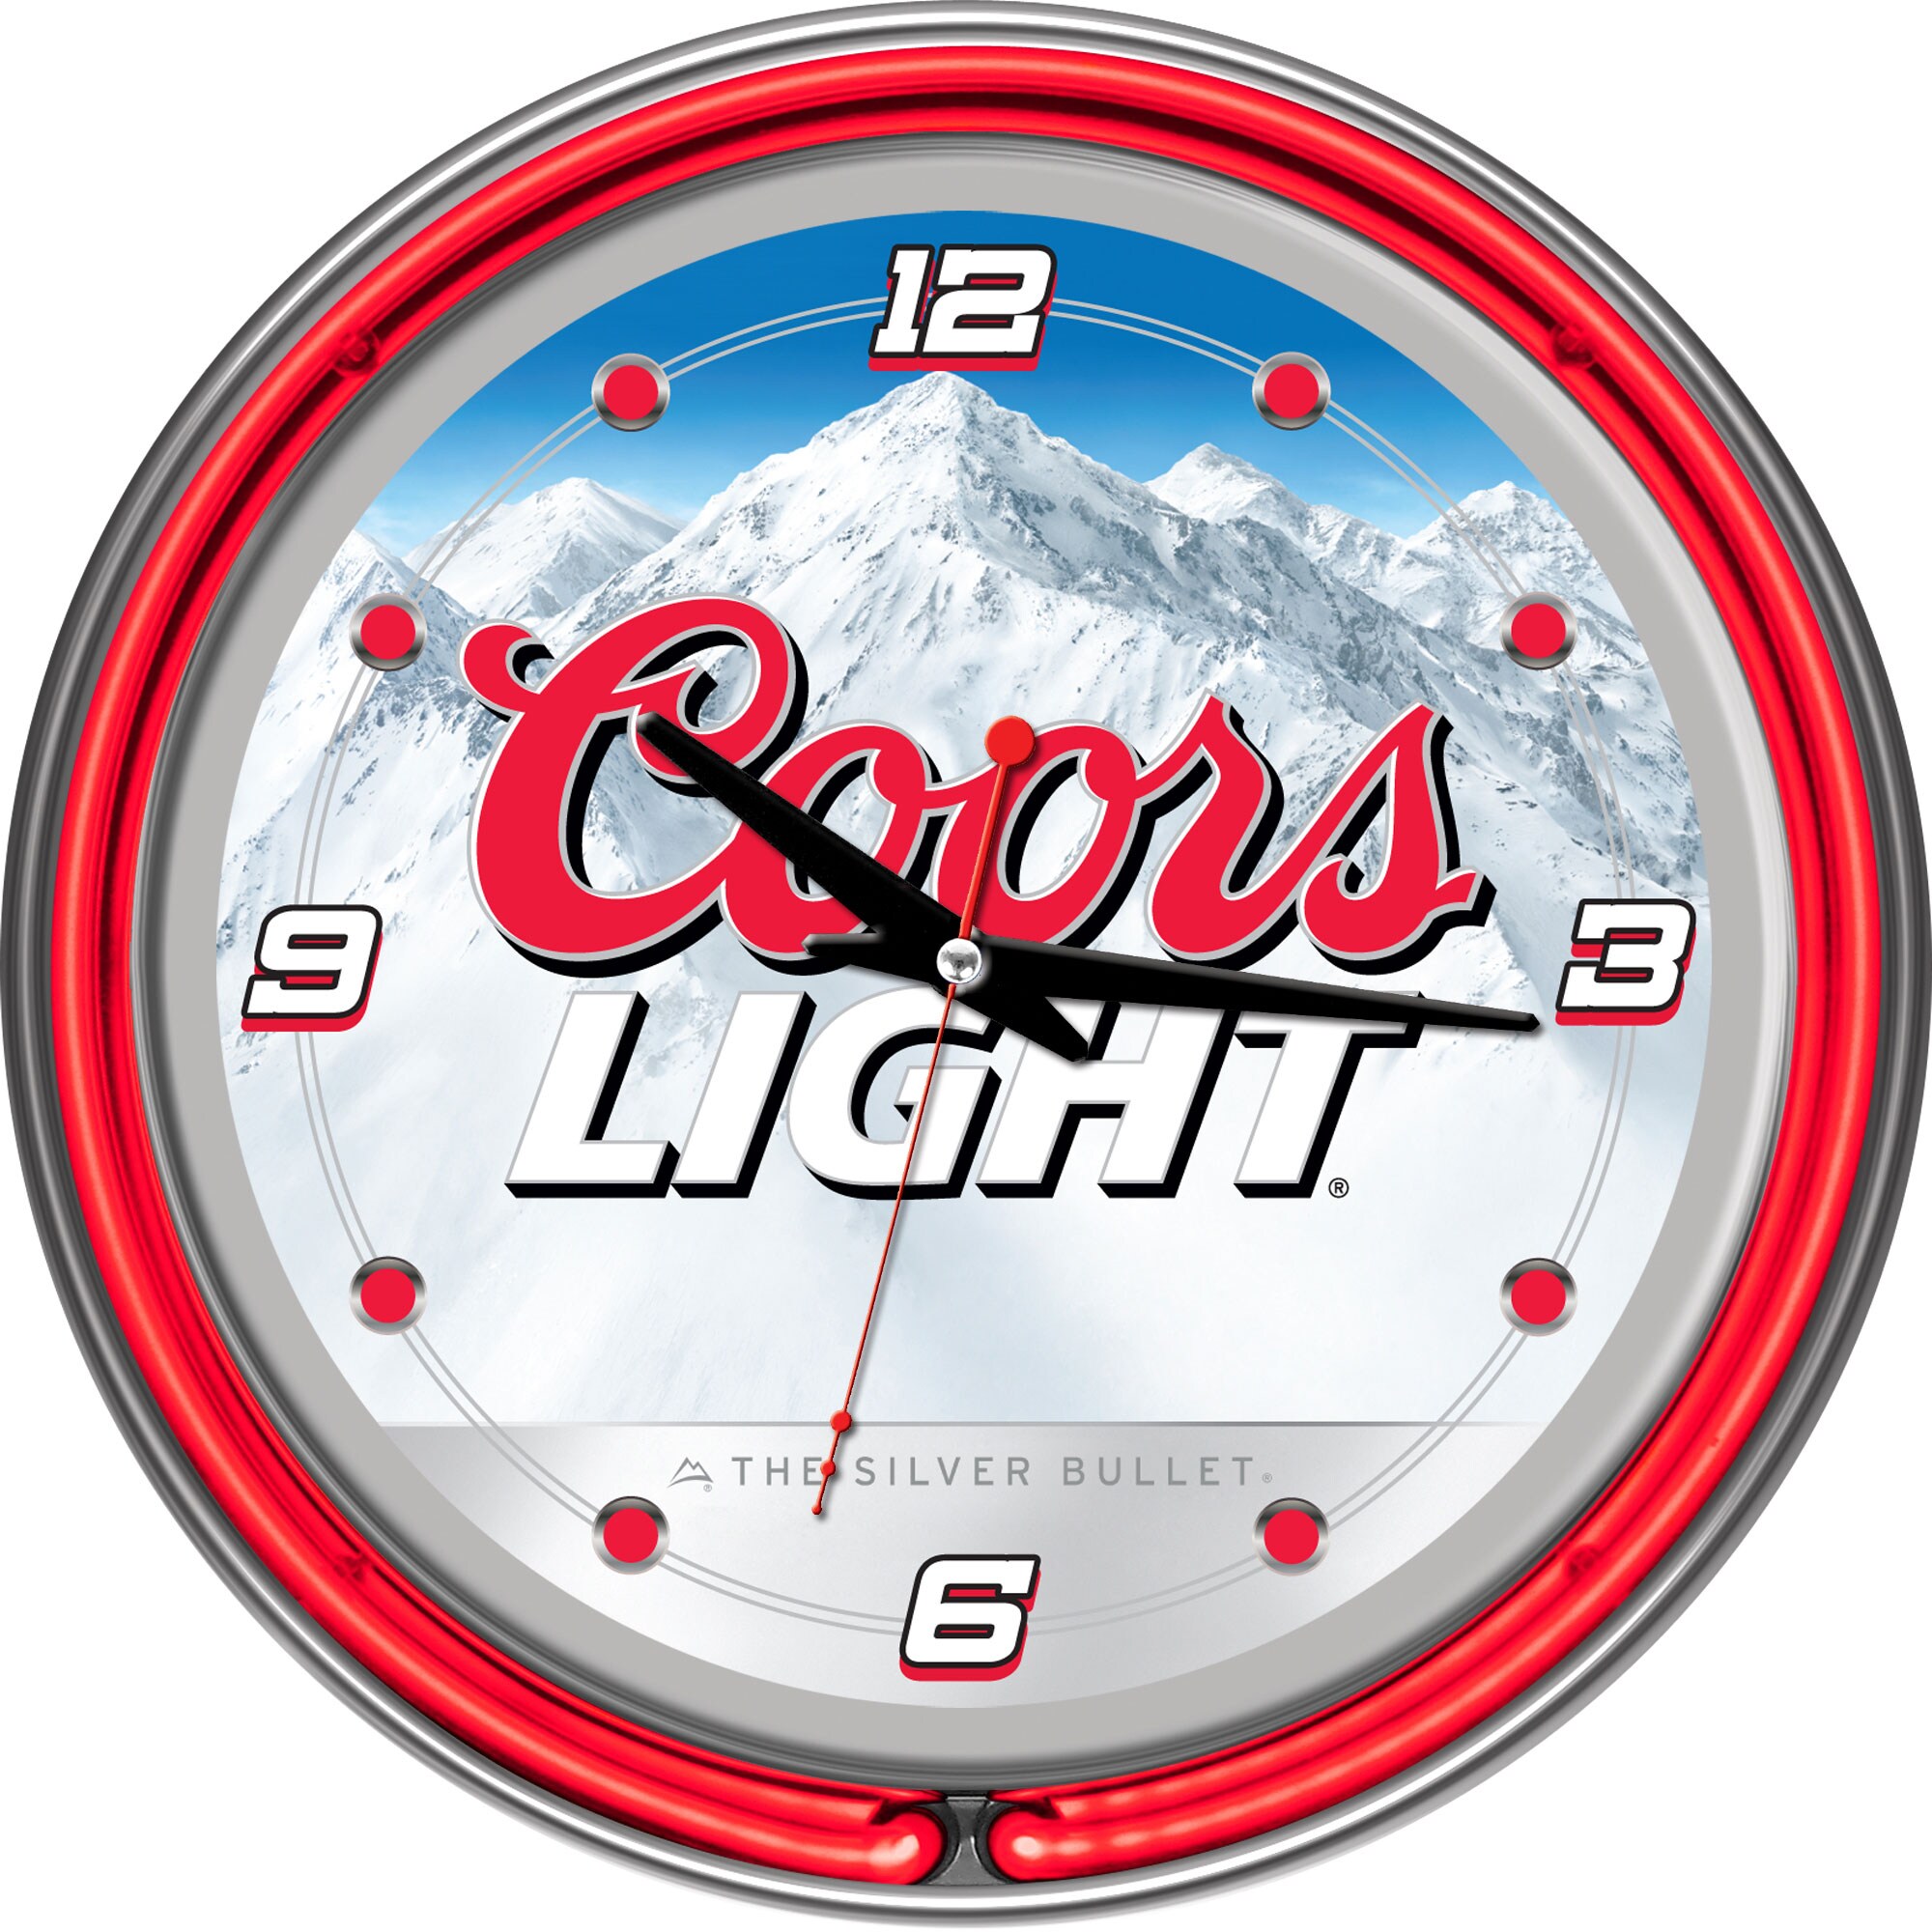 Coors Light 14 inch Neon Wall Clock (Red, blue, whiteDimensions 14 inches high x 14 inches wide x 3 inches deepWeight 4.75 )